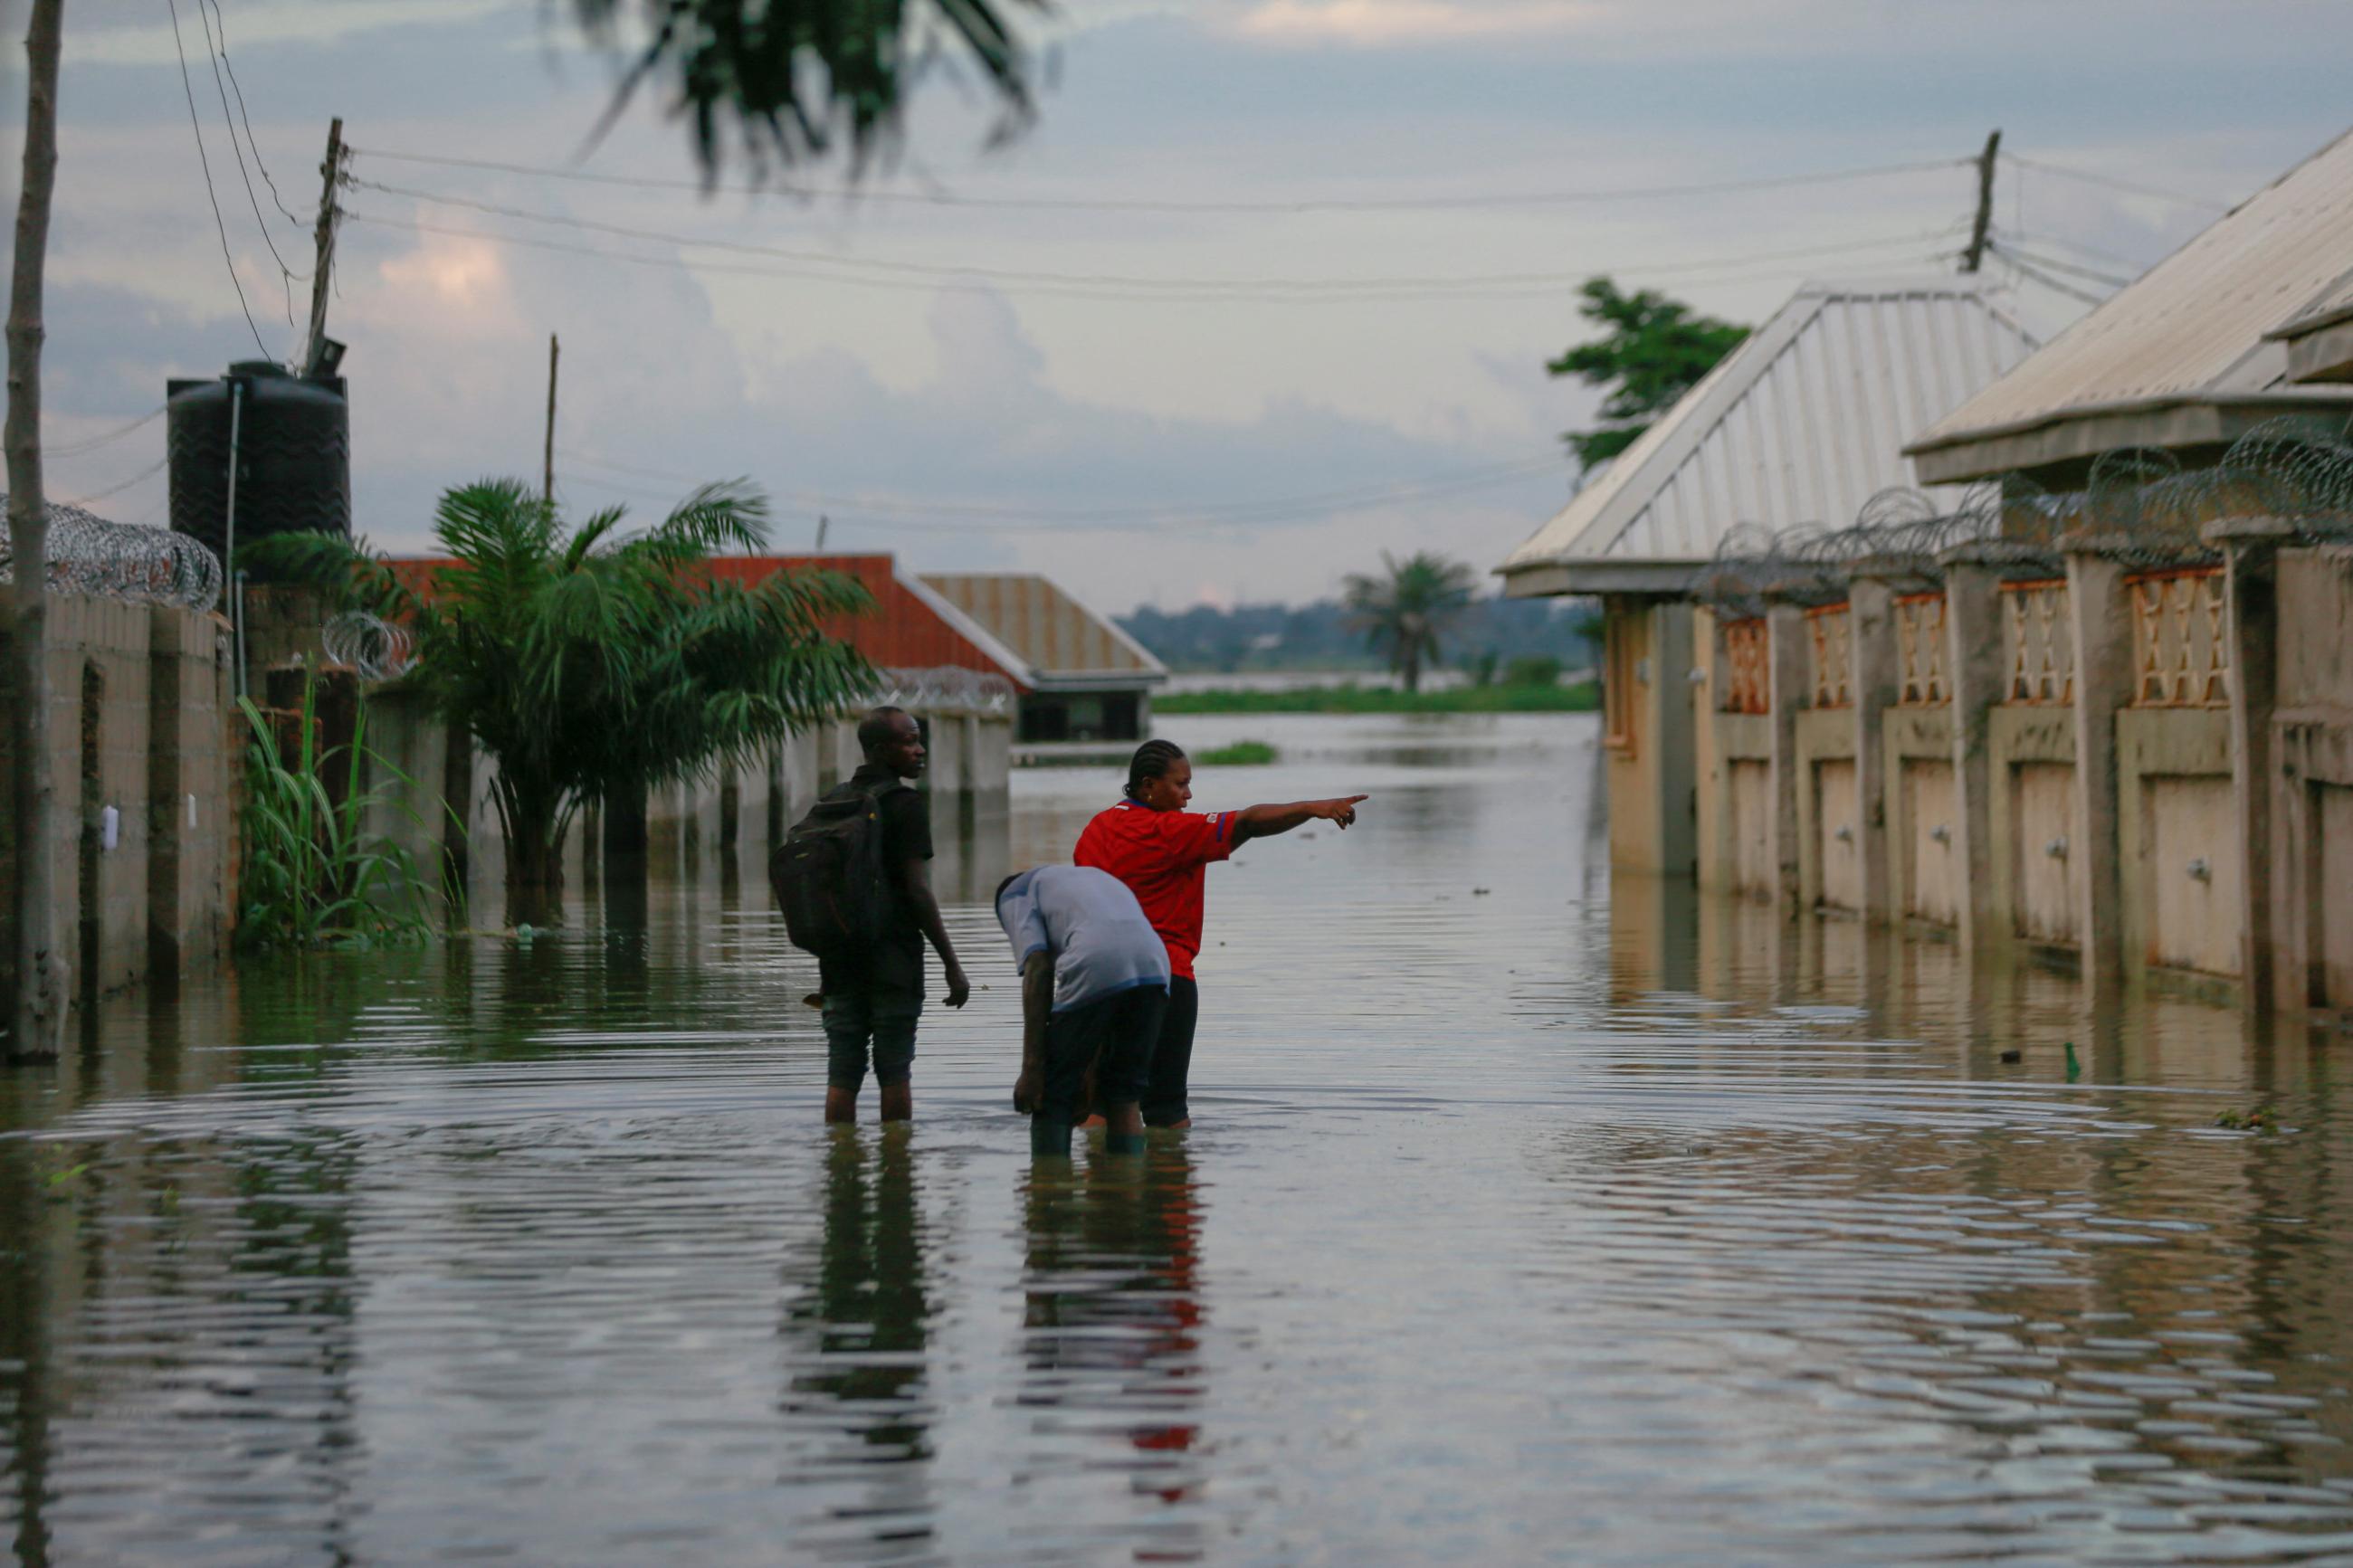 Victoria Okonkwo points at the direction of her flooded home close to the shore of River Benue in Makurdi, Nigeria, September 30, 2022. 